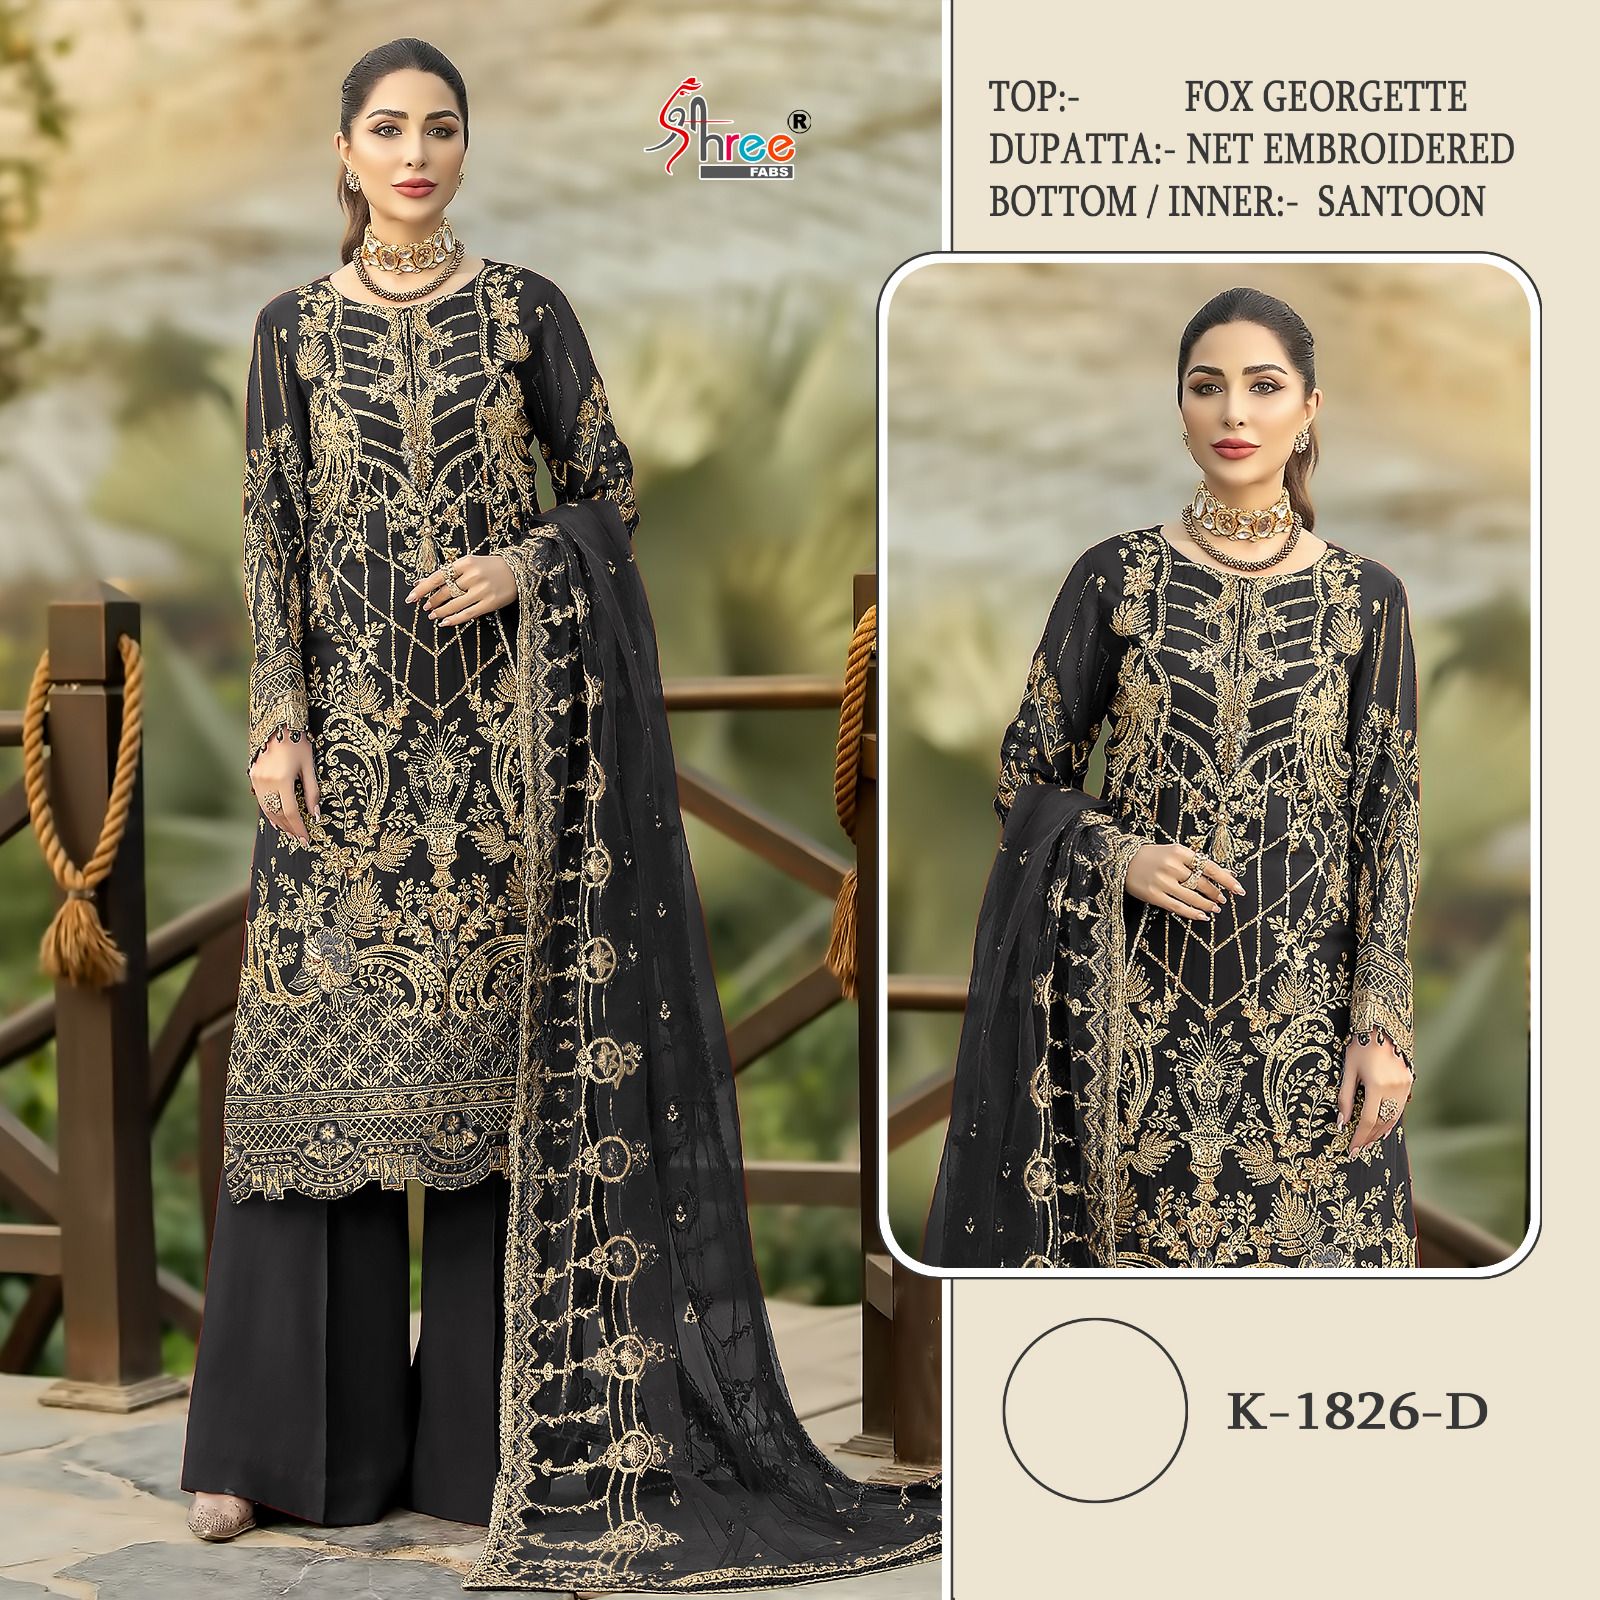 SHREE FABS K 1826 SERIES PAKISTANI SUITS IN INDIA